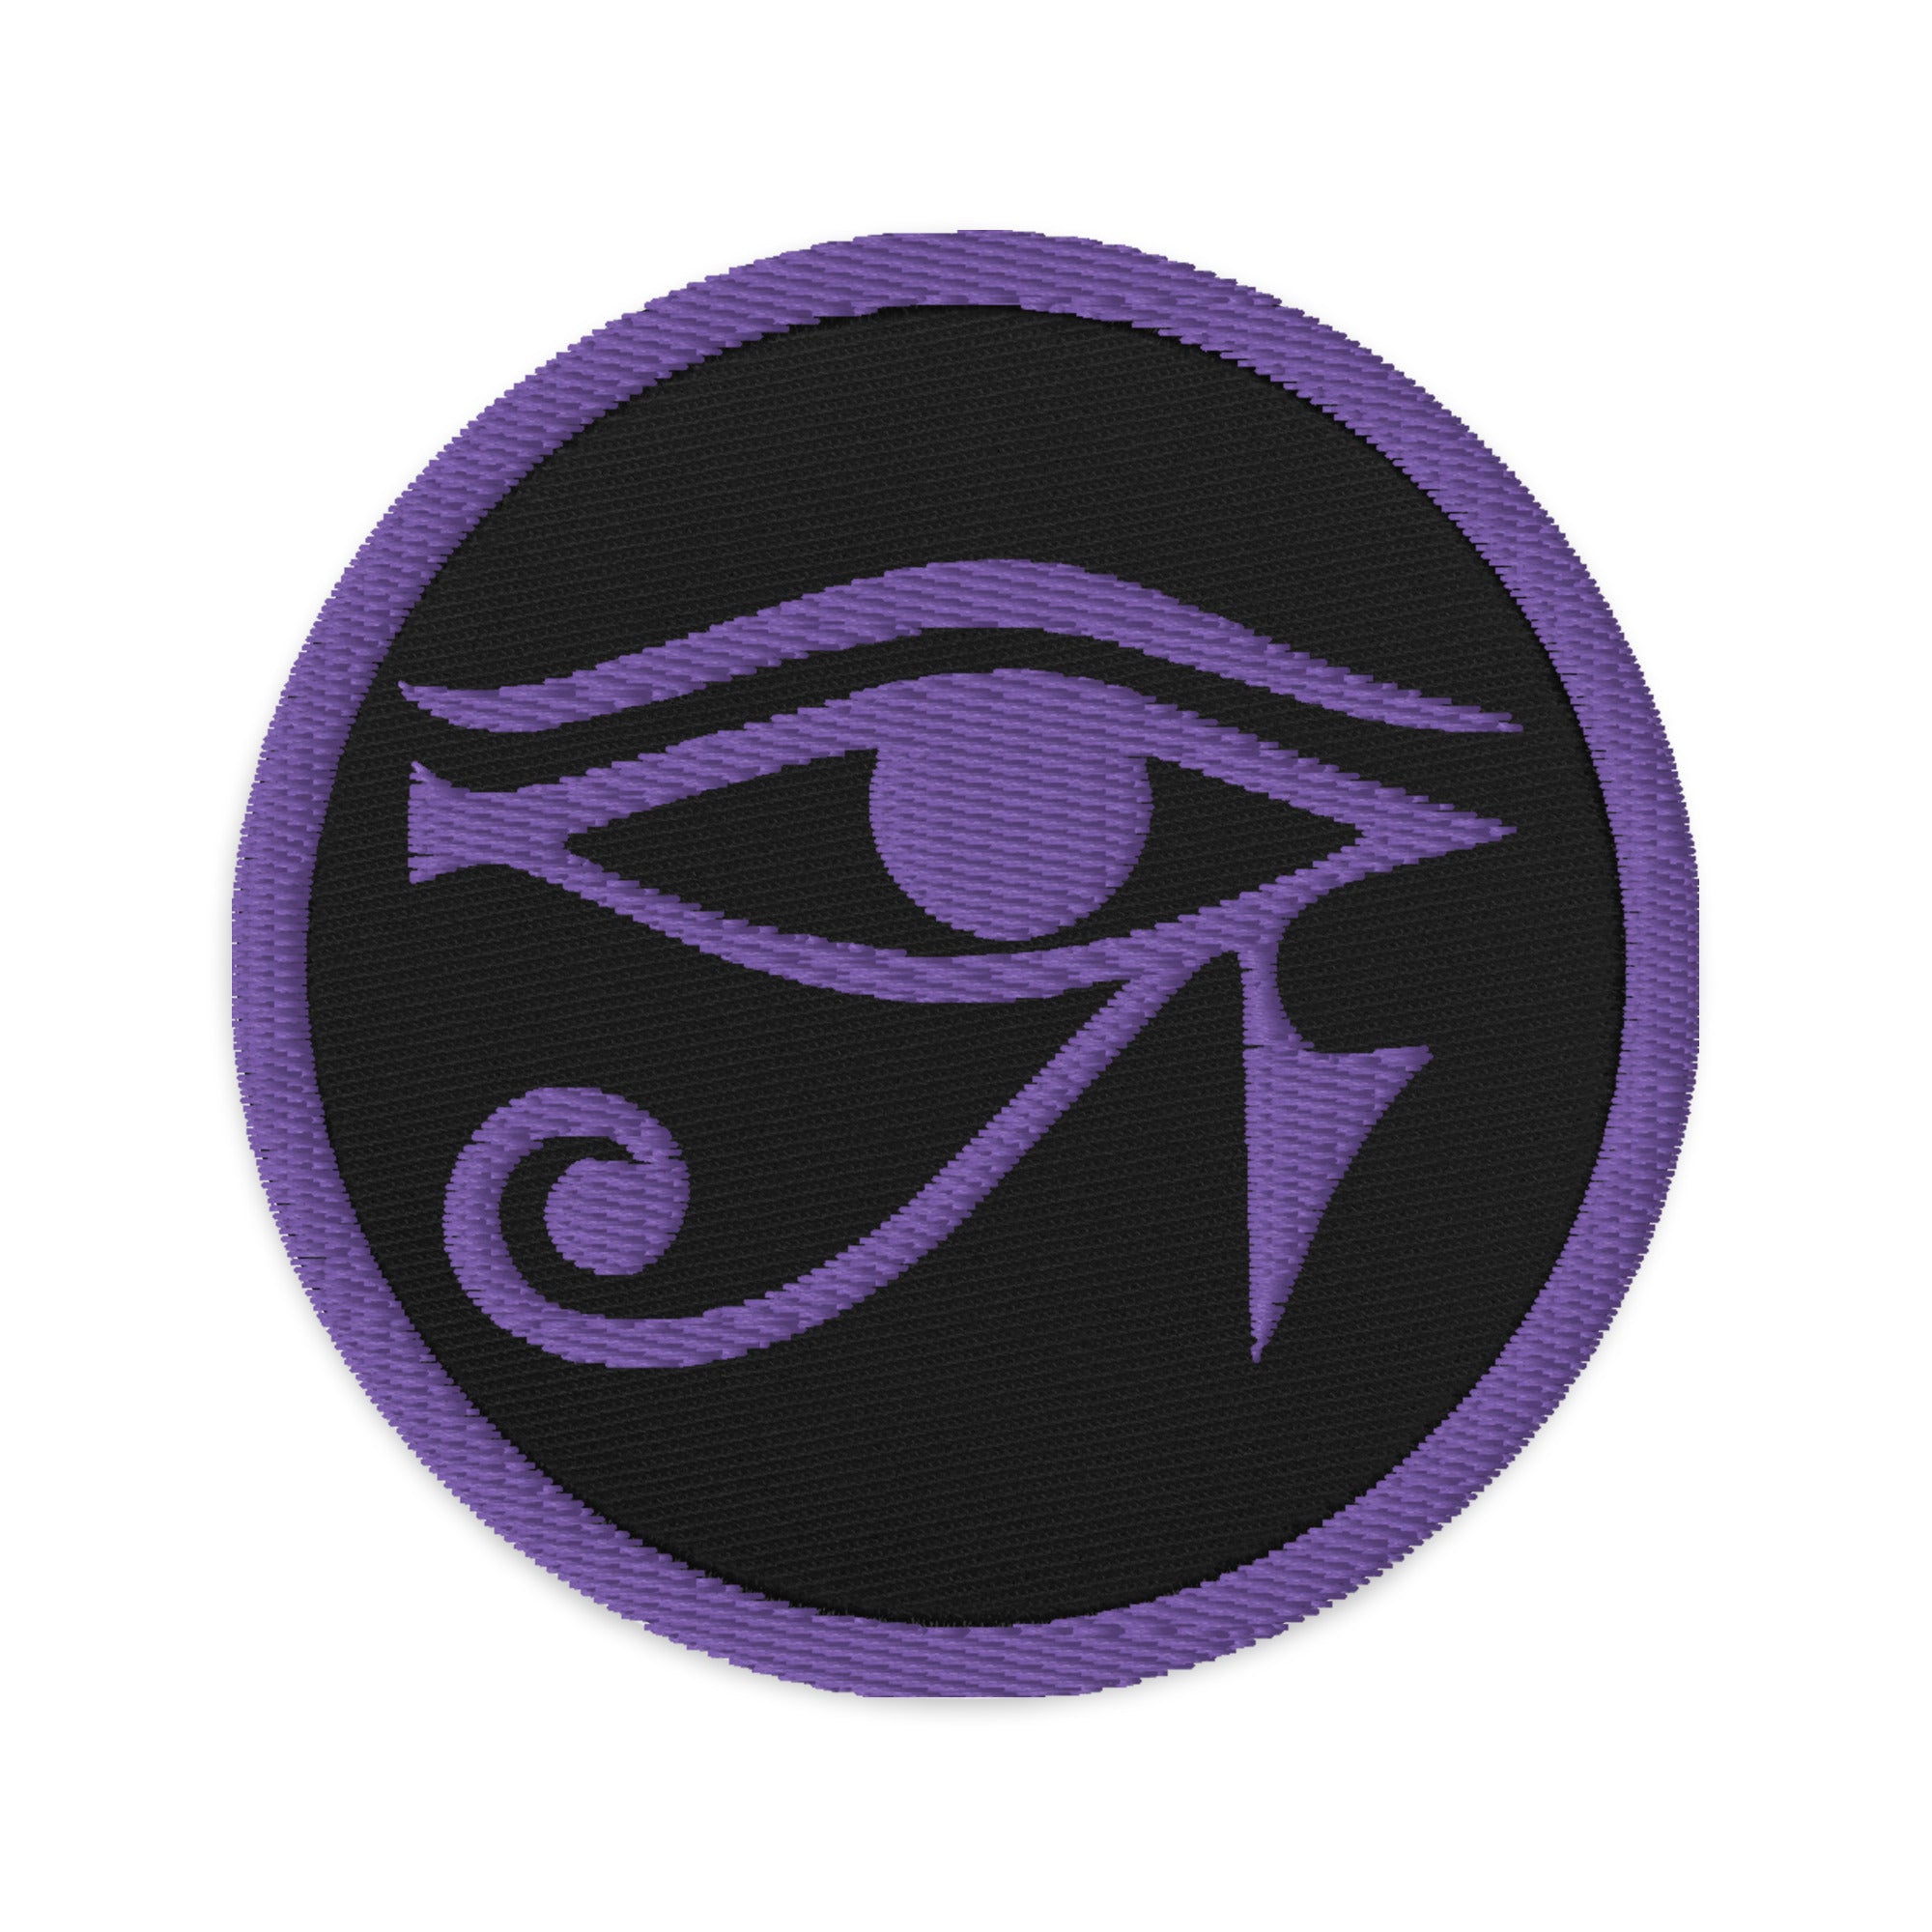 Eye of Ra Egyptian Goddess Embroidered Patch Deathrock Style - Edge of Life Designs